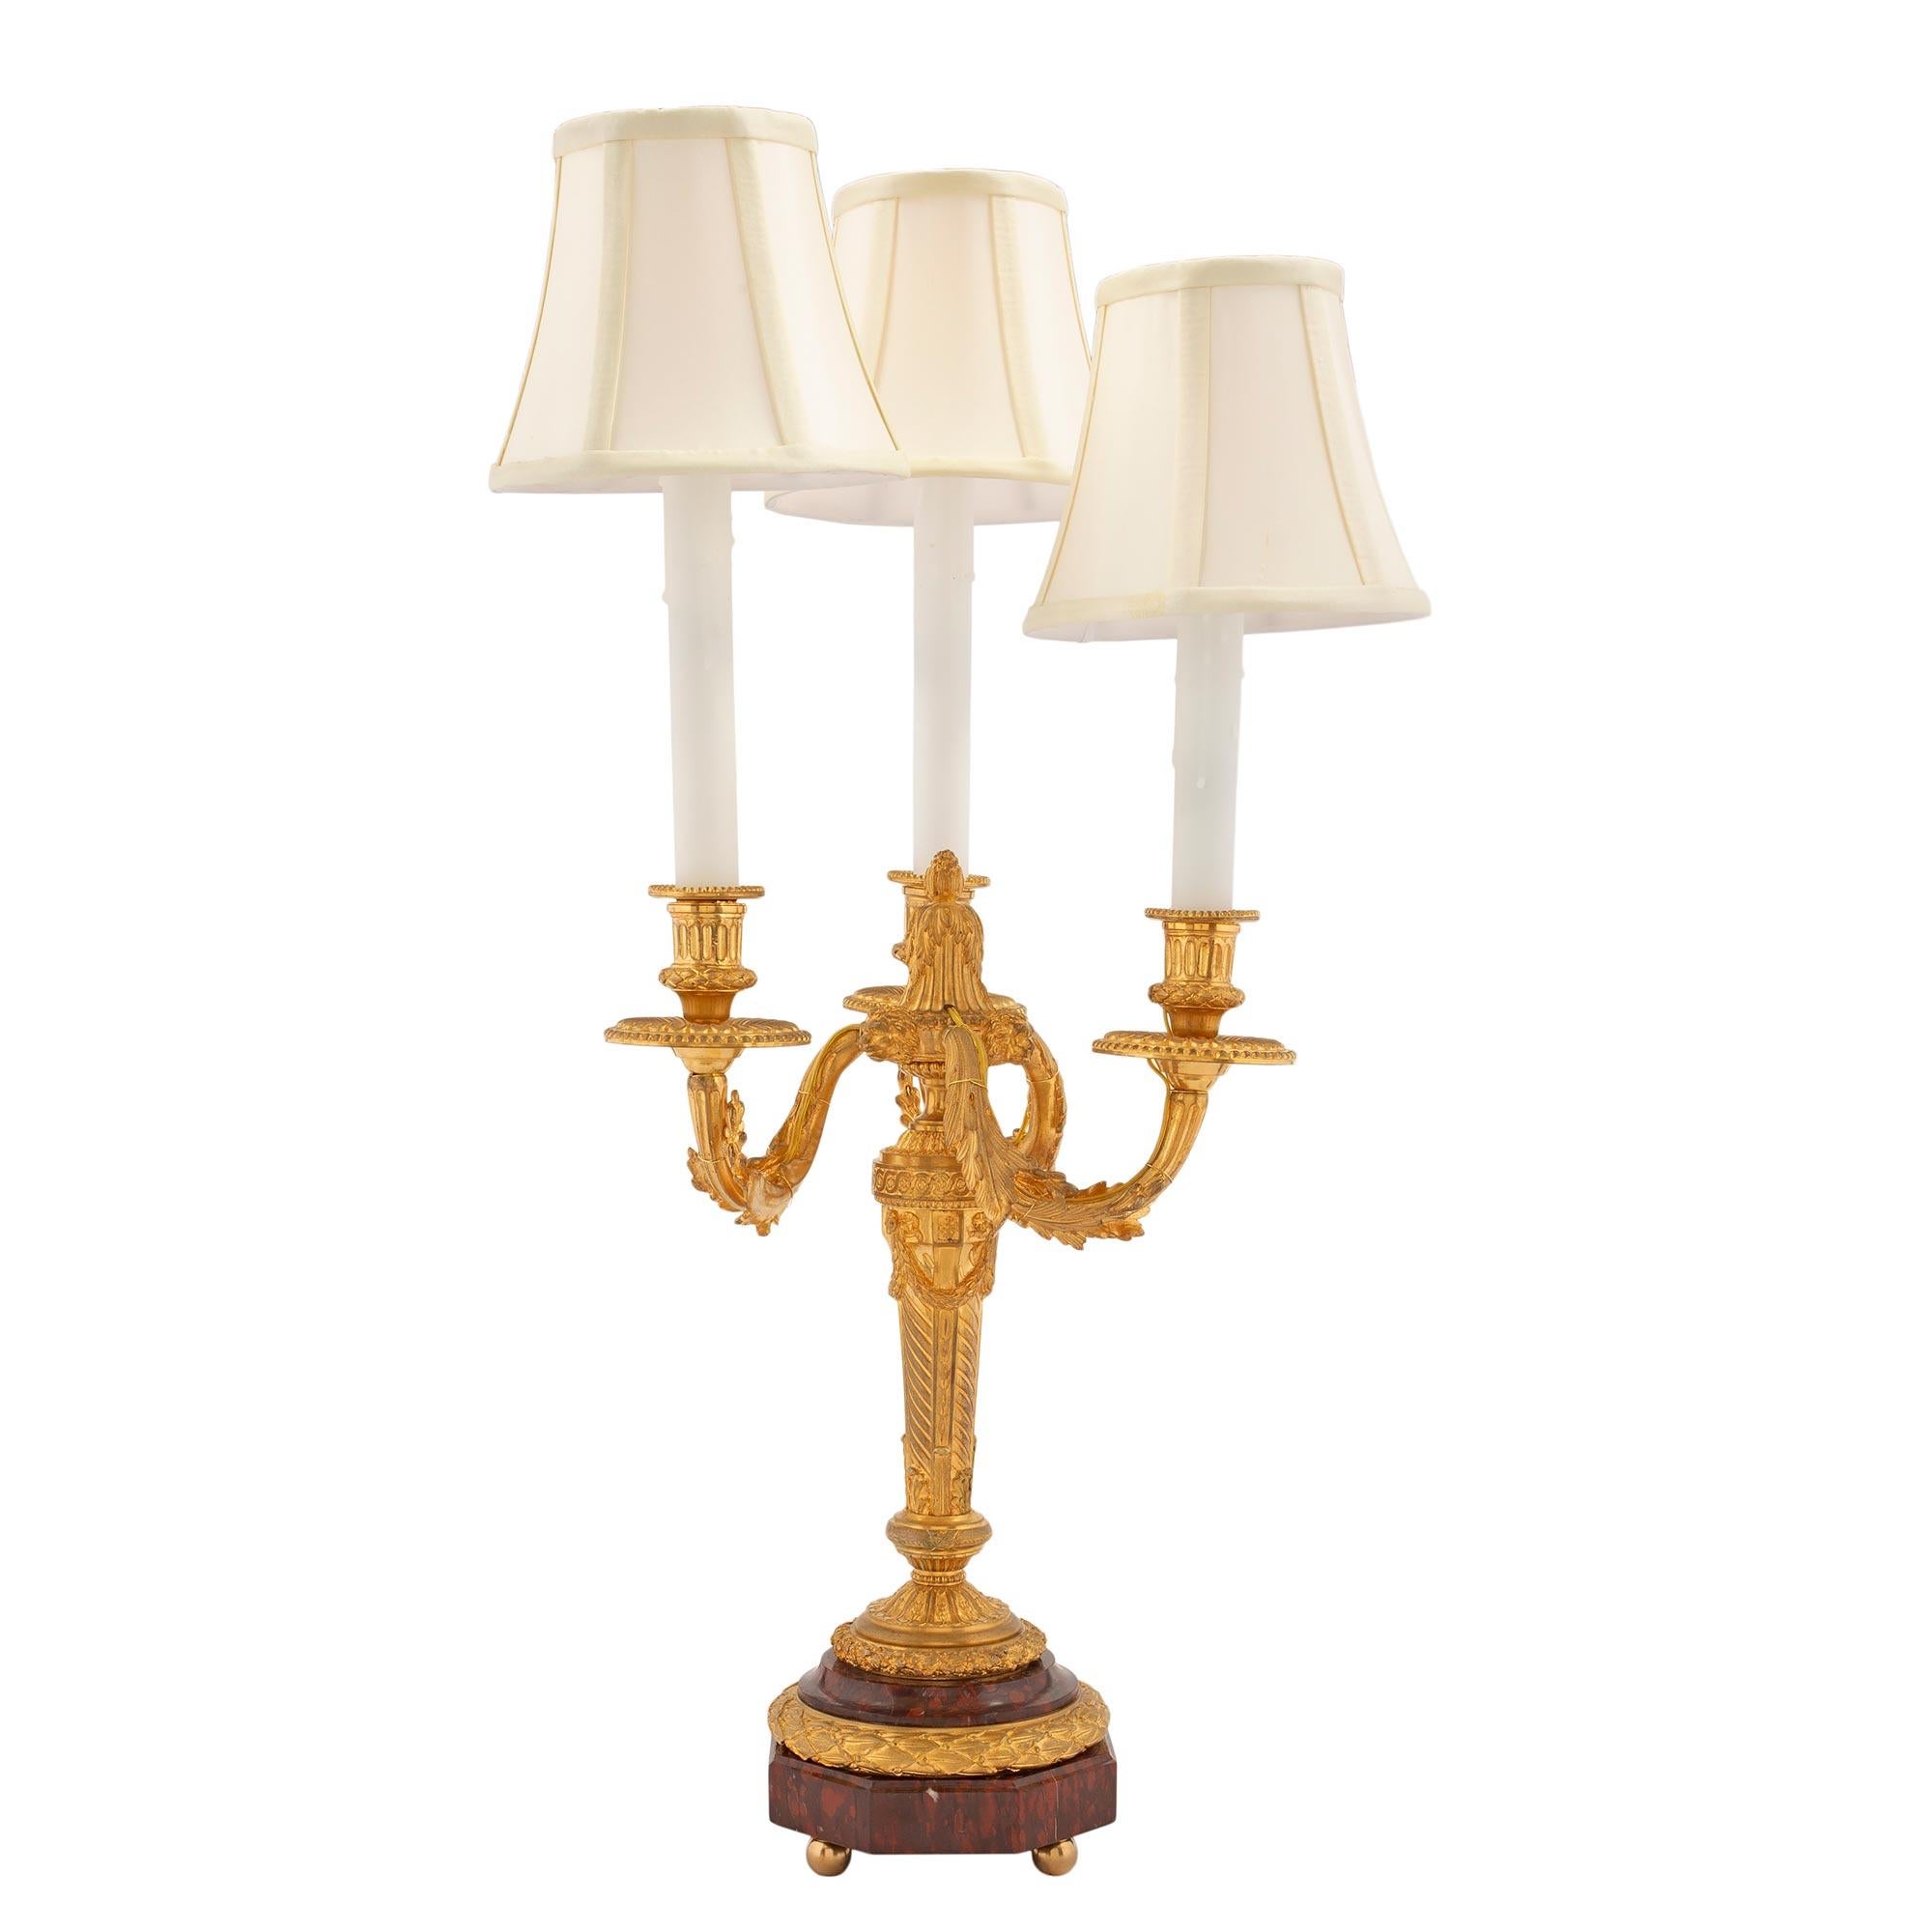 An elegant and high quality pair of French 19th century Louis XVI st. ormolu and Rouge Griotte marble three arm electrified candelabra lamps. Each lamp is raised by fine ormolu ball feet below an octagonal Rouge Griotte marble base with a mottled